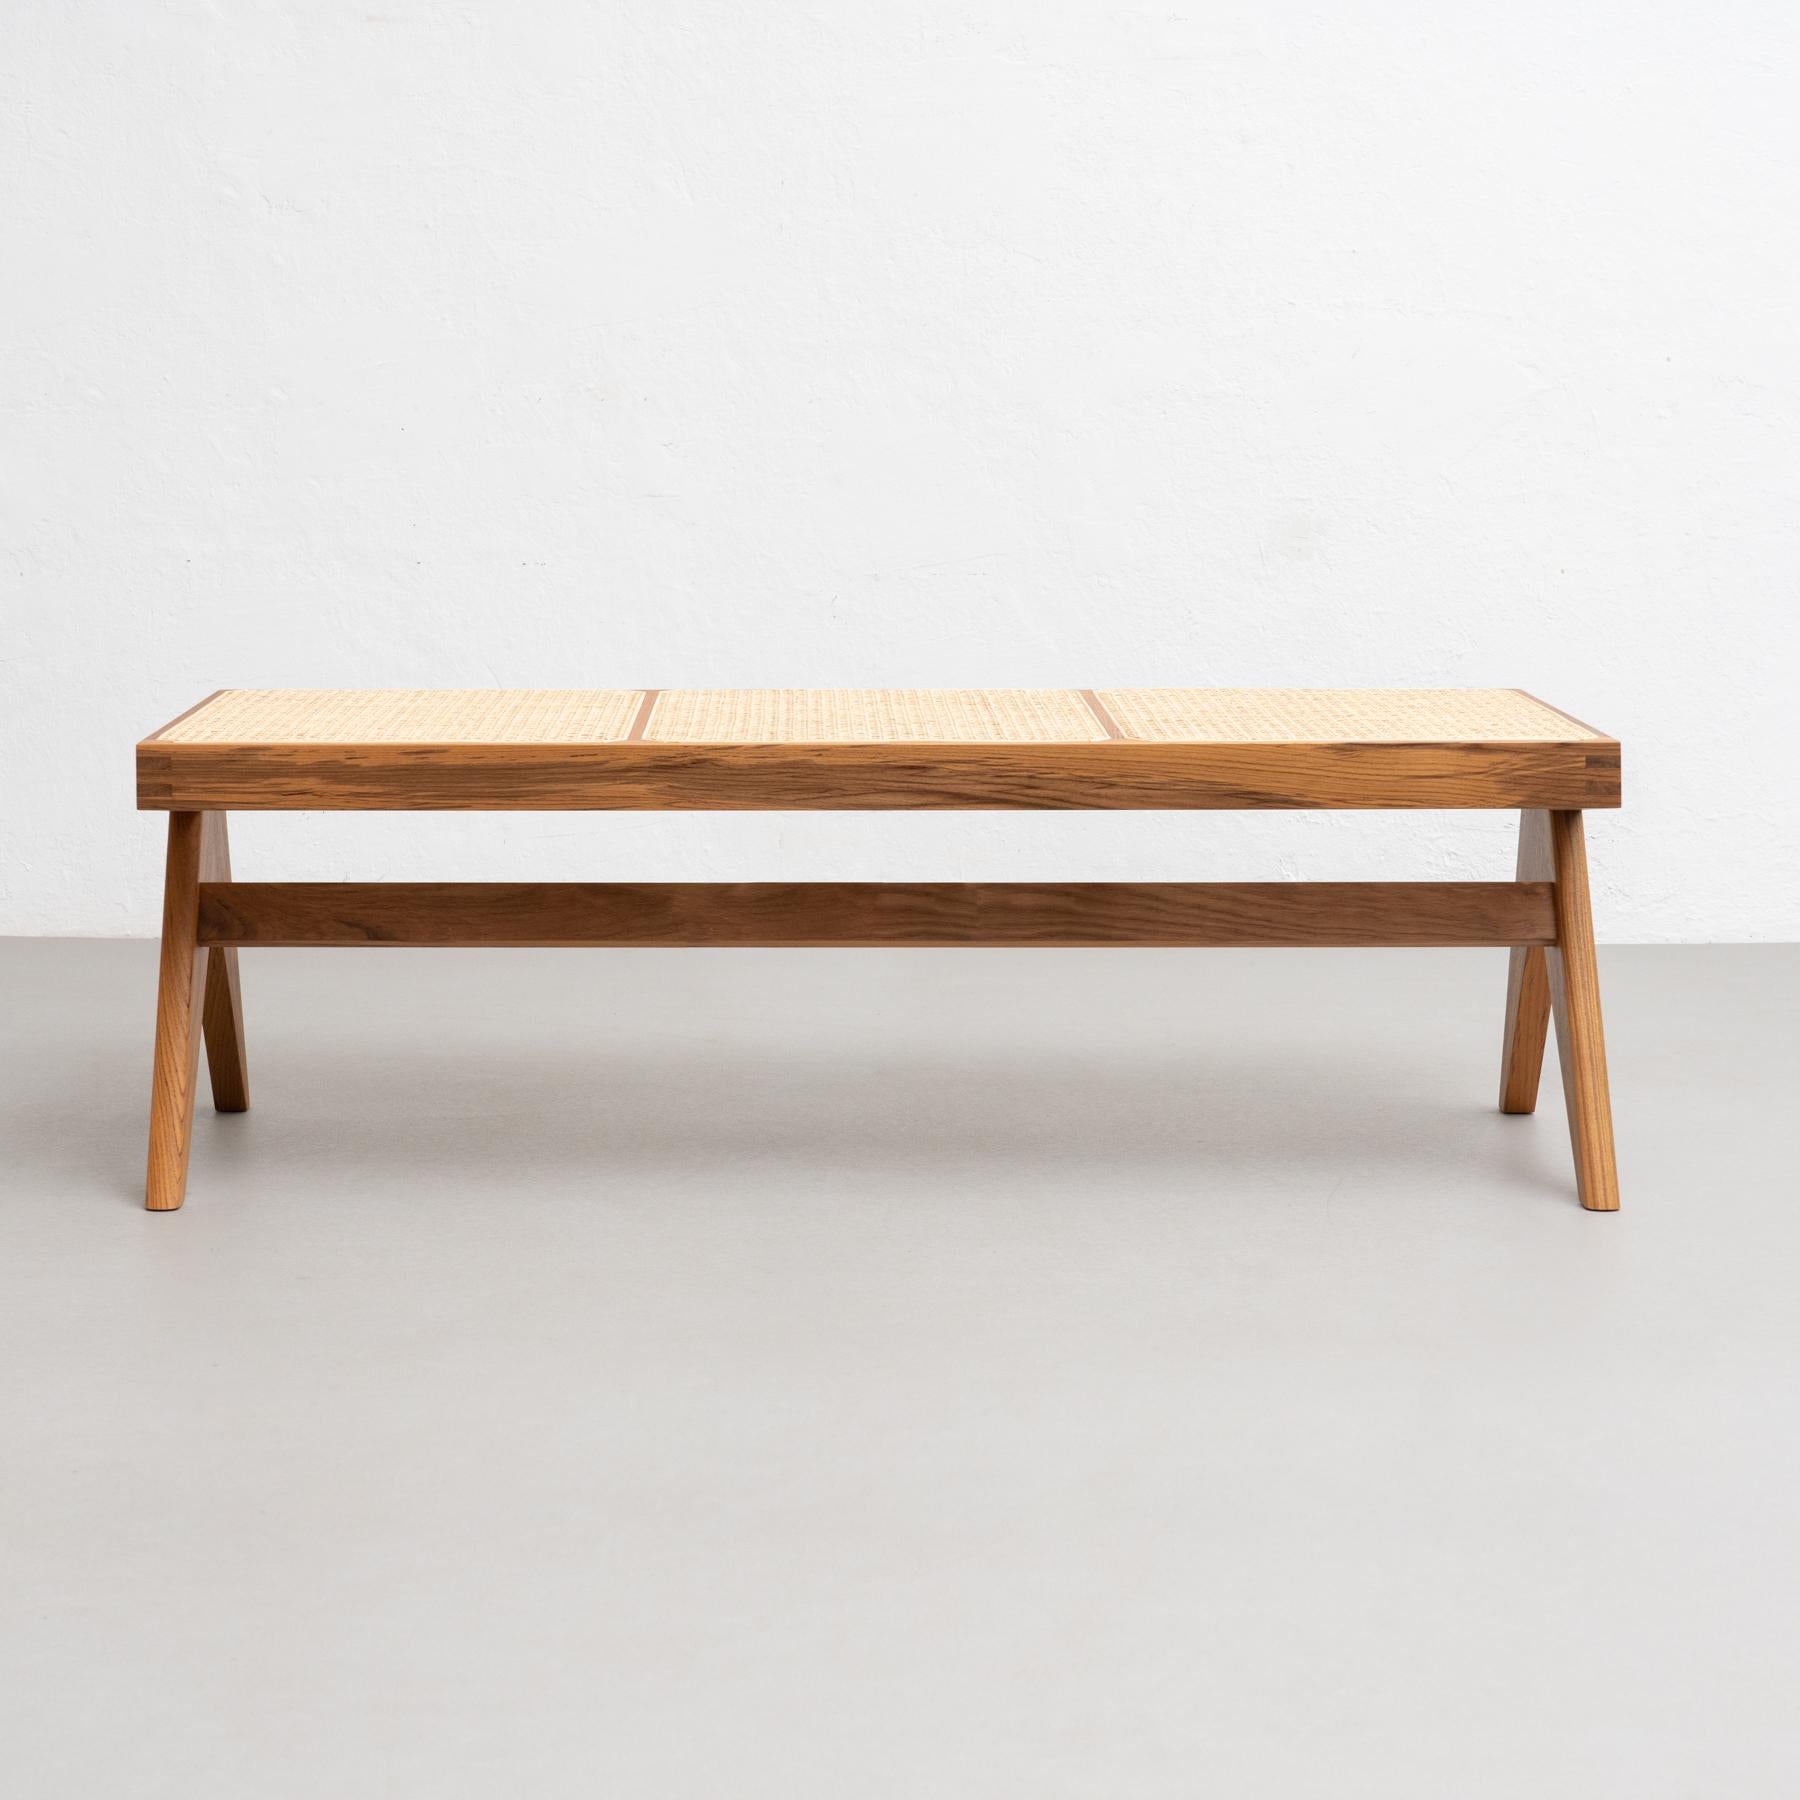 Contemporary Pierre Jeanneret 057 Civil Bench, Wood and Woven Viennese Cane by Cassina For Sale